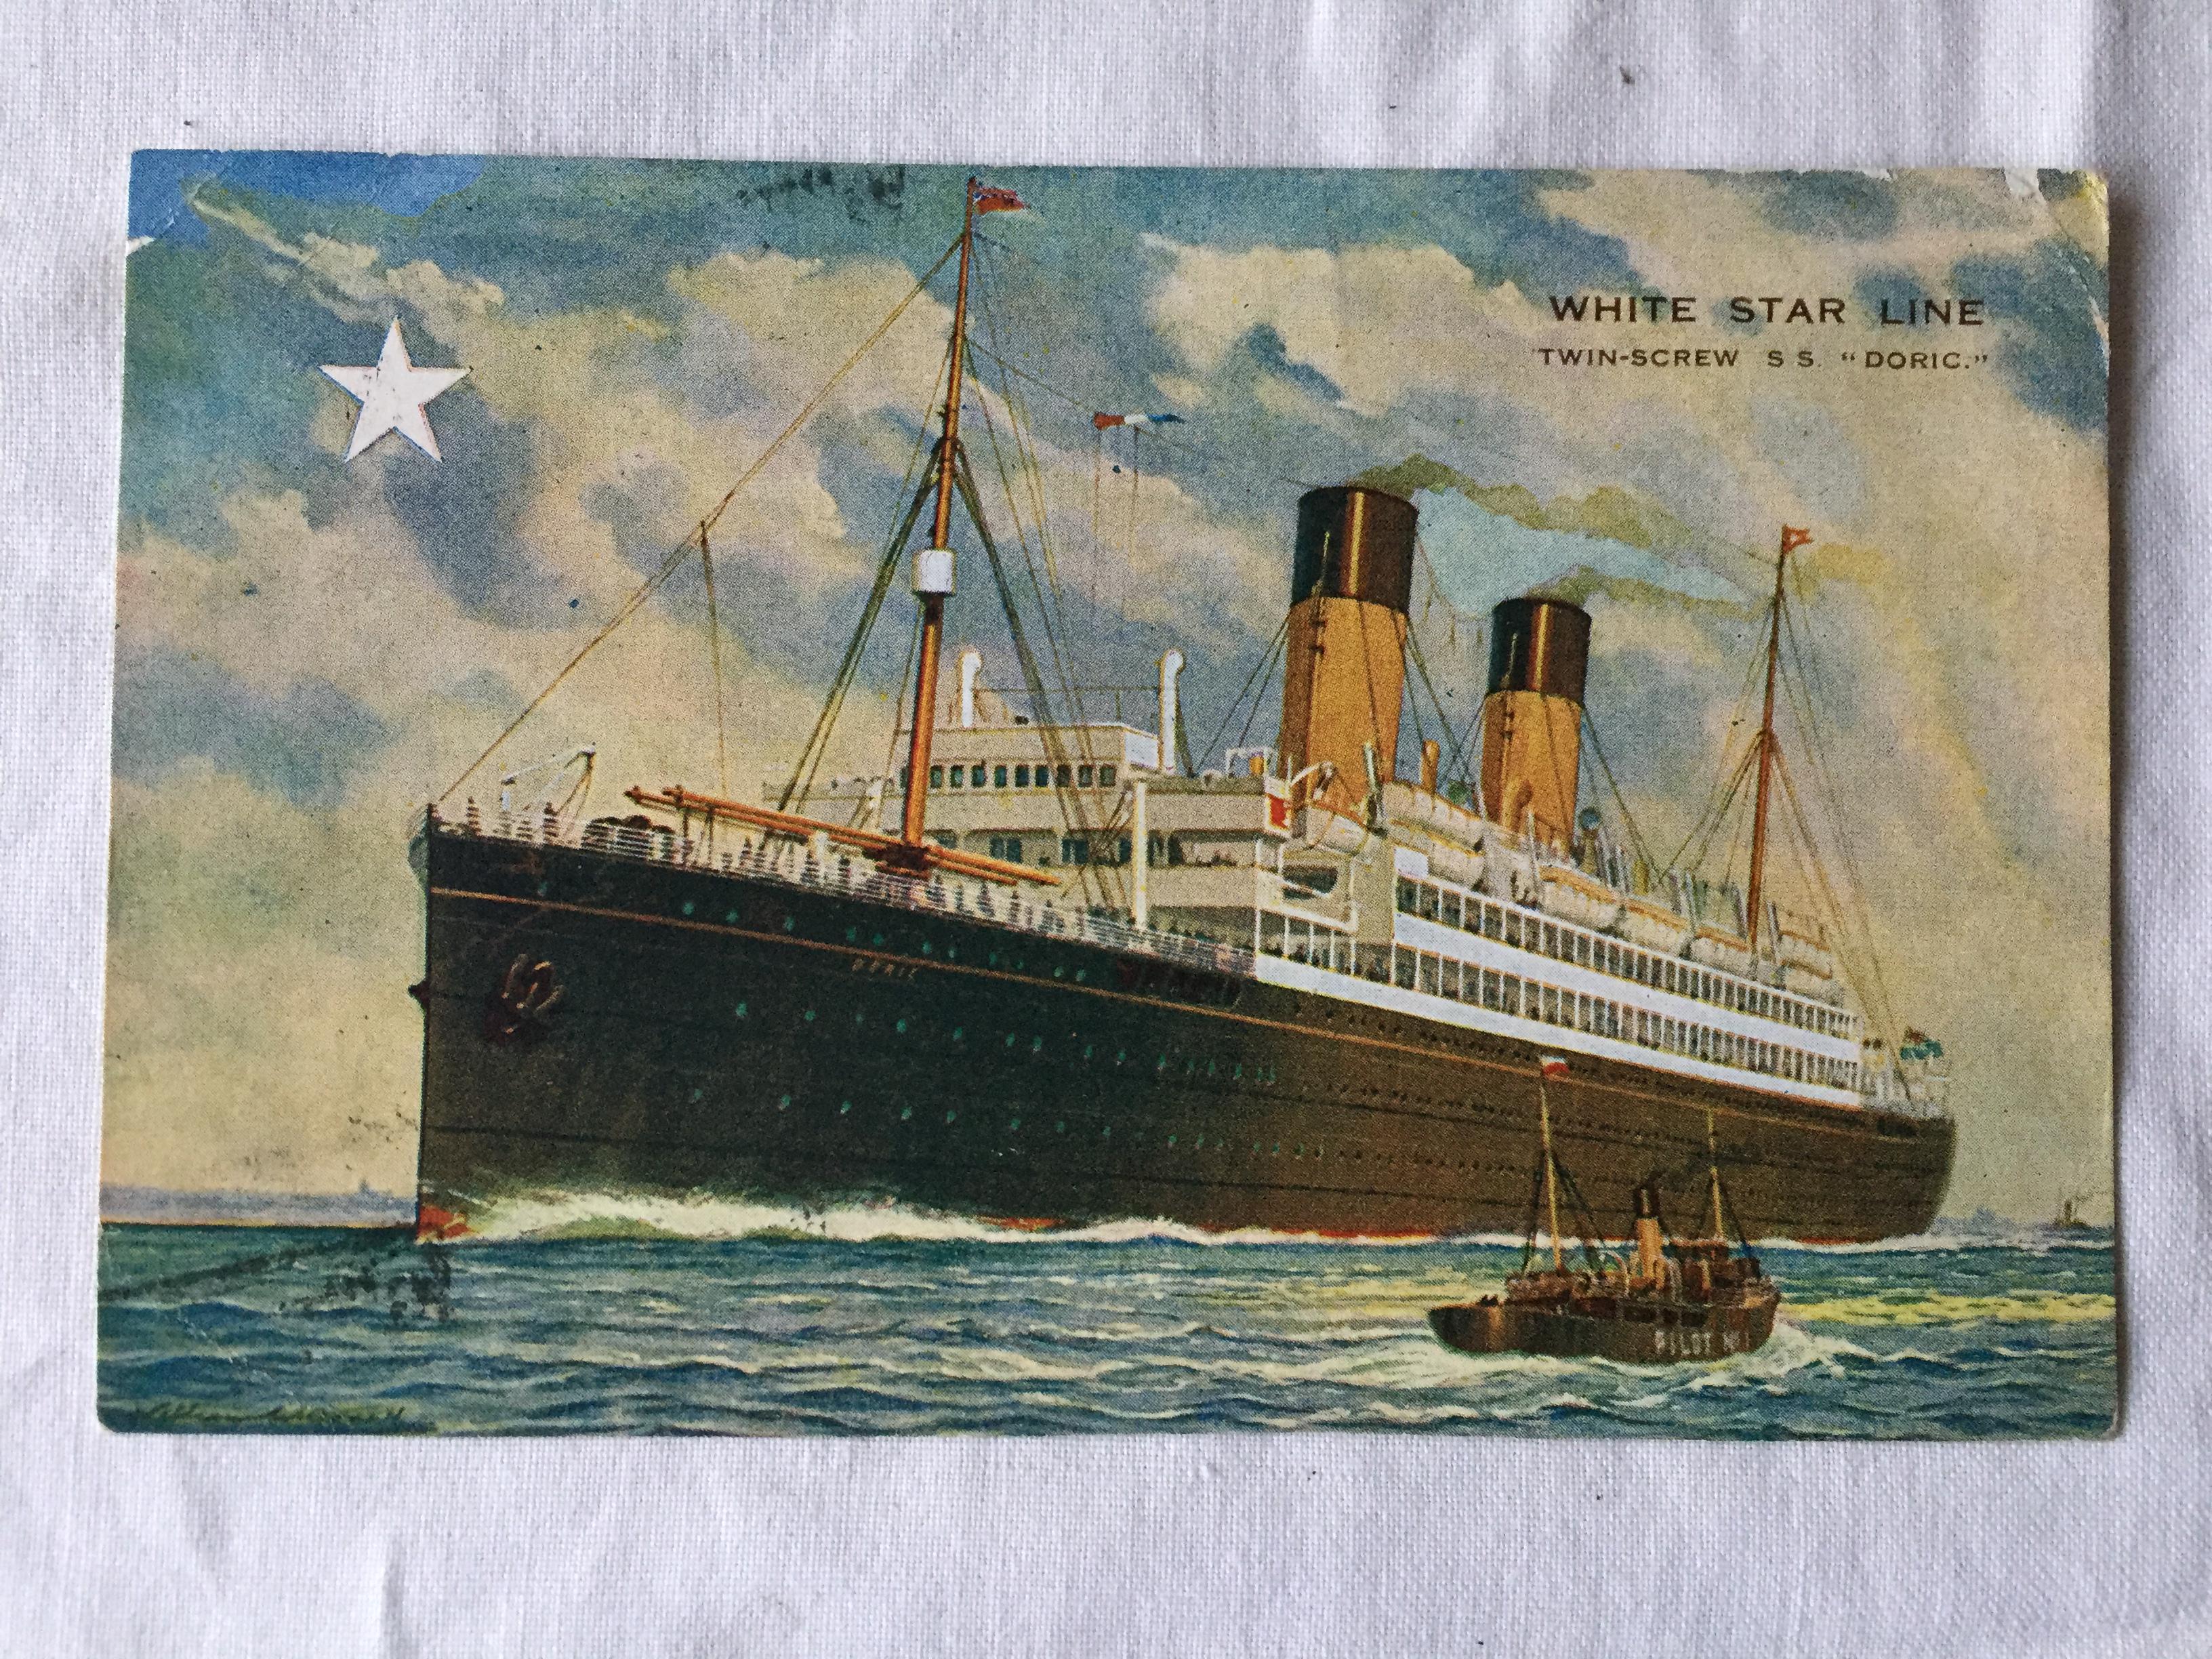 USED POSTCARD FROM THE RMS DORIC POSTED 25th SEPTEMBER 1933 